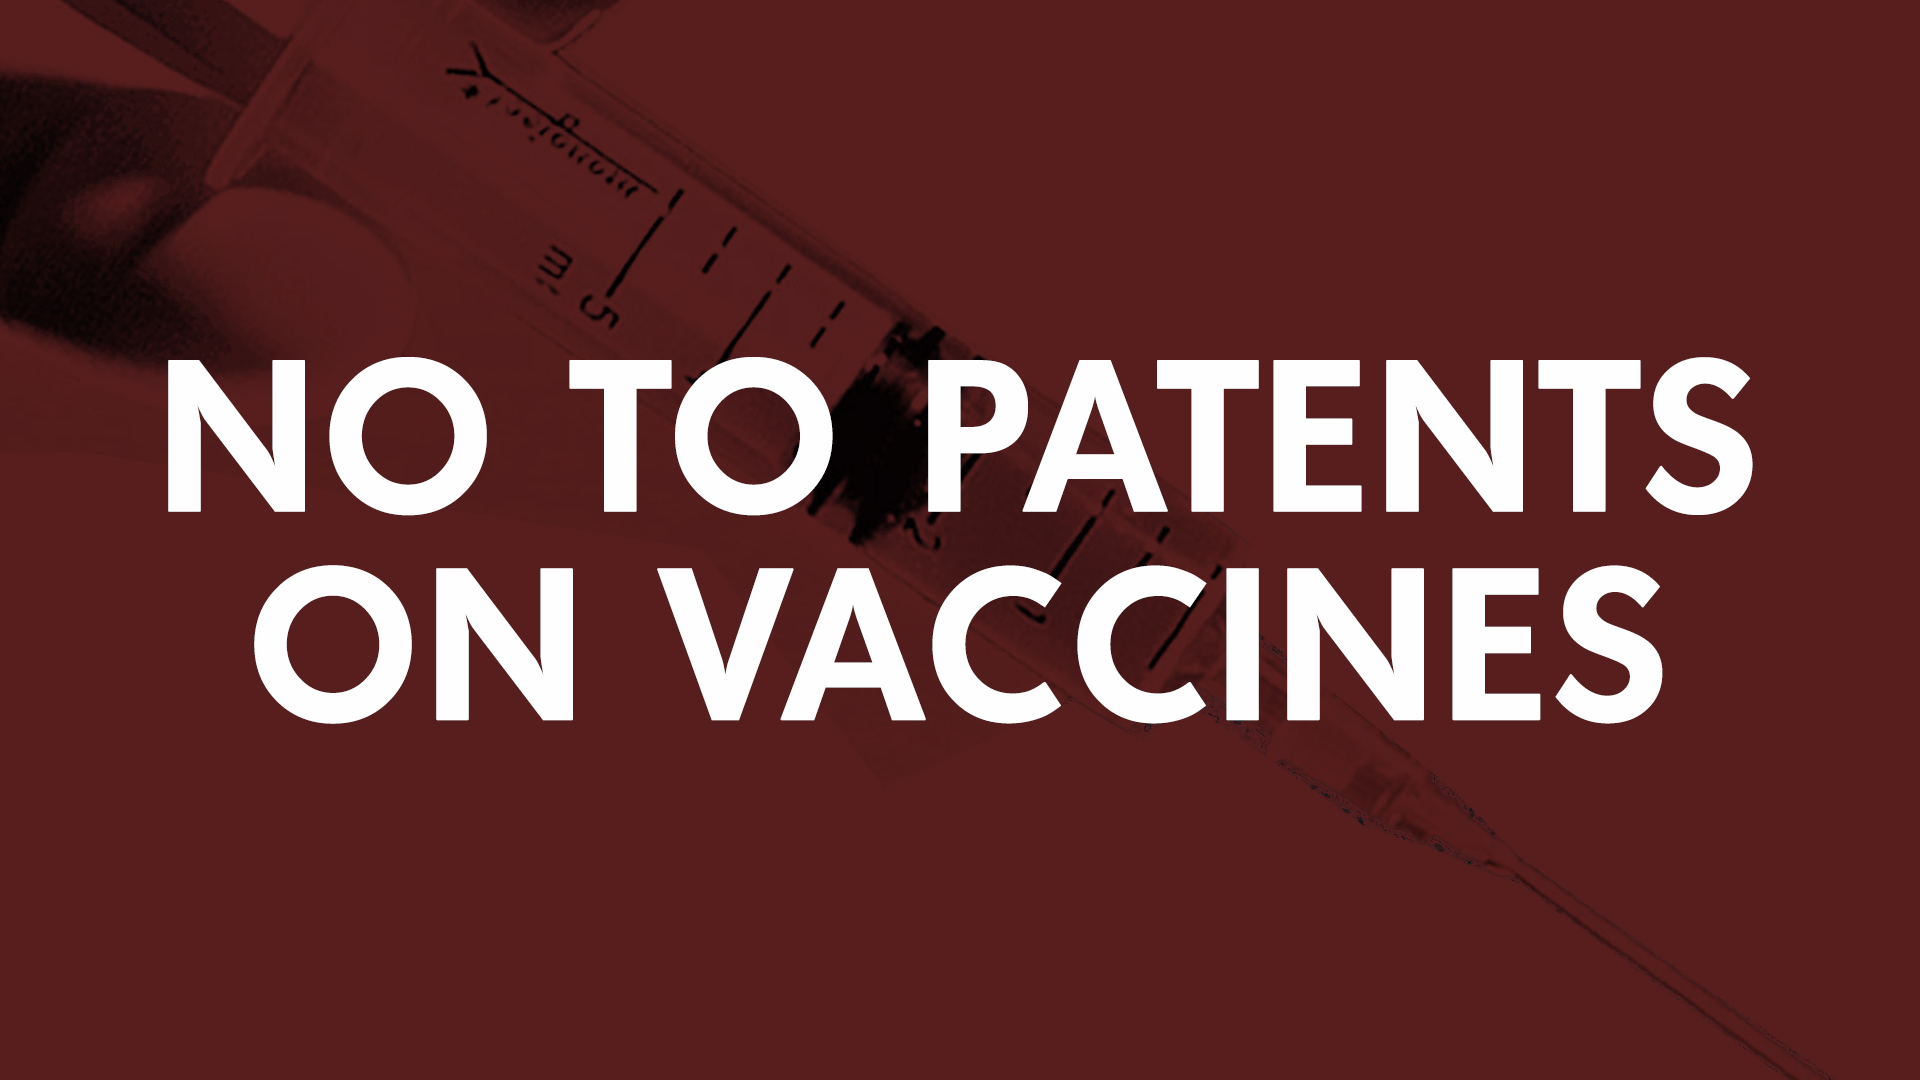 No To Patents on Vaccines